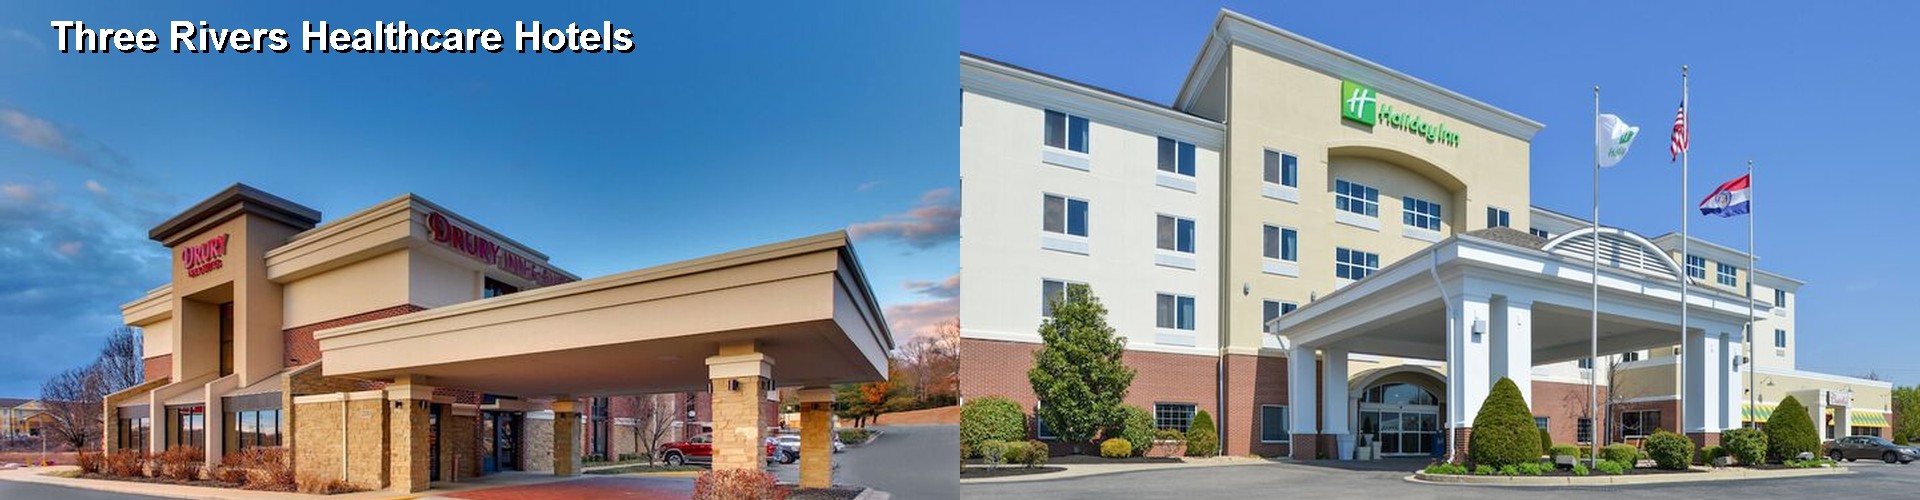 5 Best Hotels near Three Rivers Healthcare